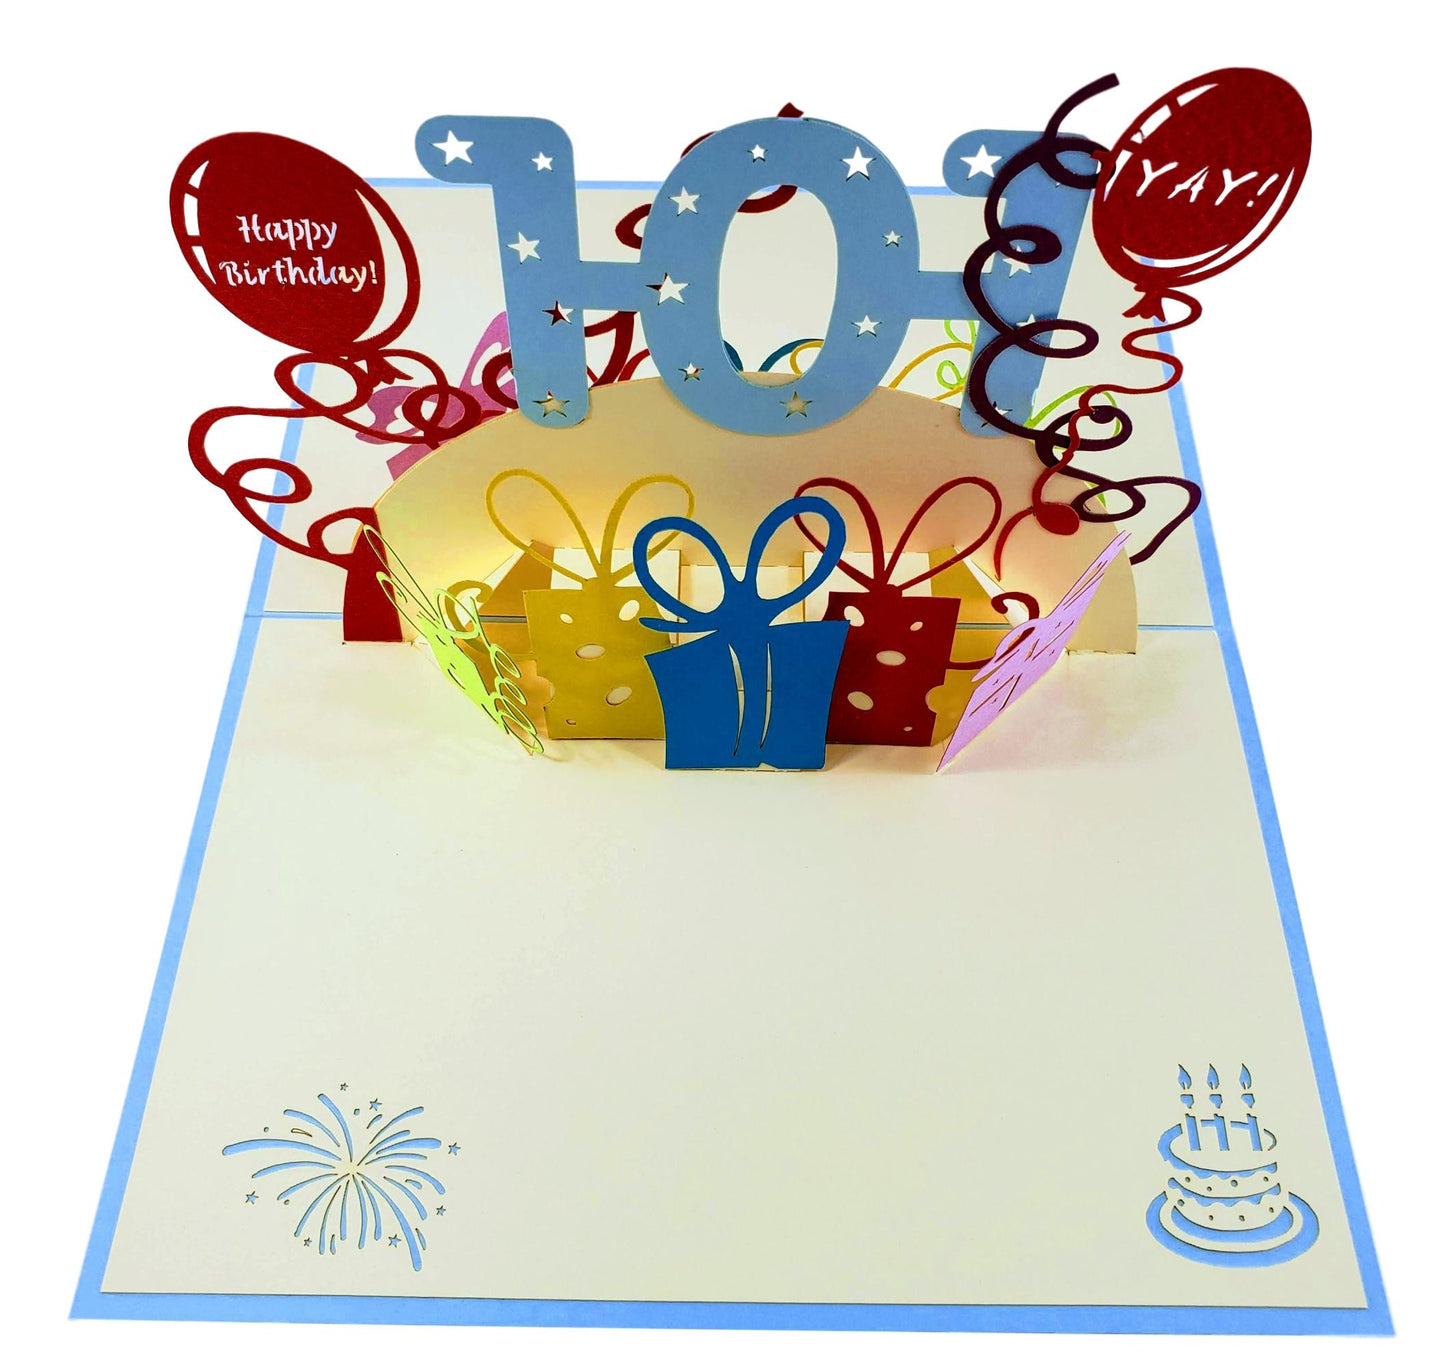 Happy 101st Birthday With Lots of Presents 3D Pop Up Greeting Card - Age - Birthday - iGifts And Cards